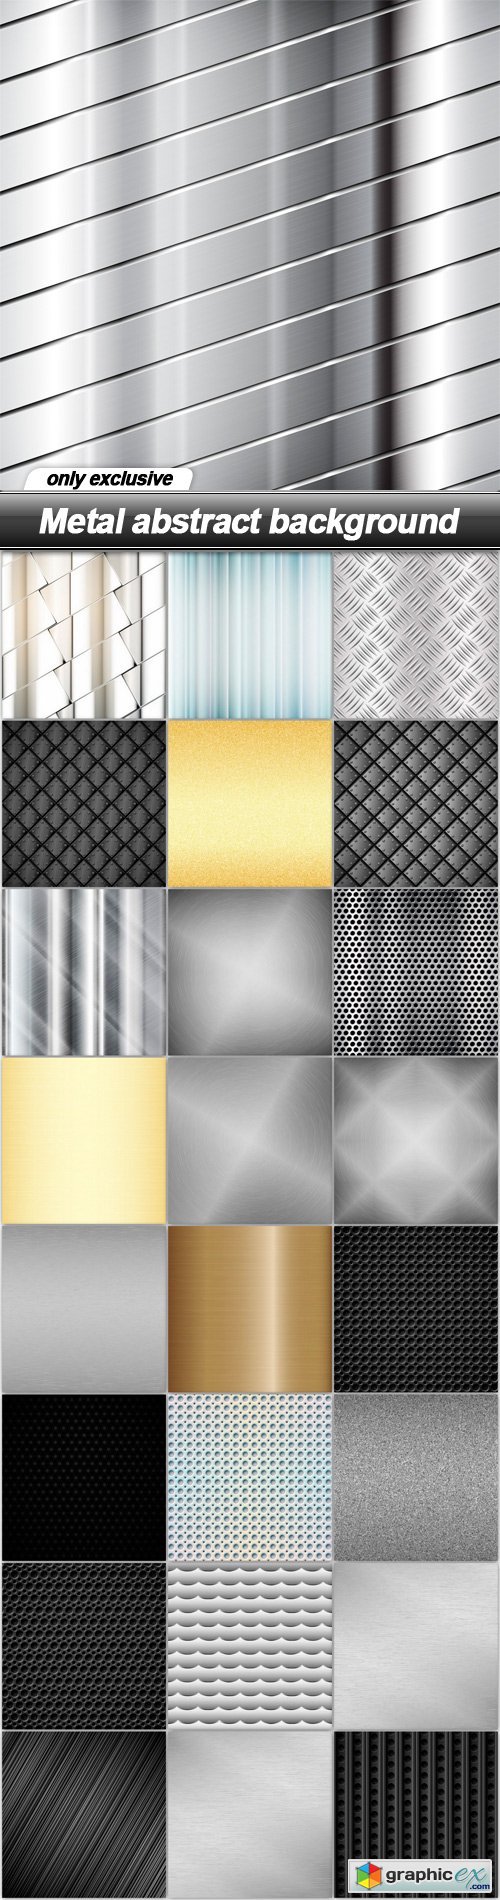 Metal abstract background - 25 EPS